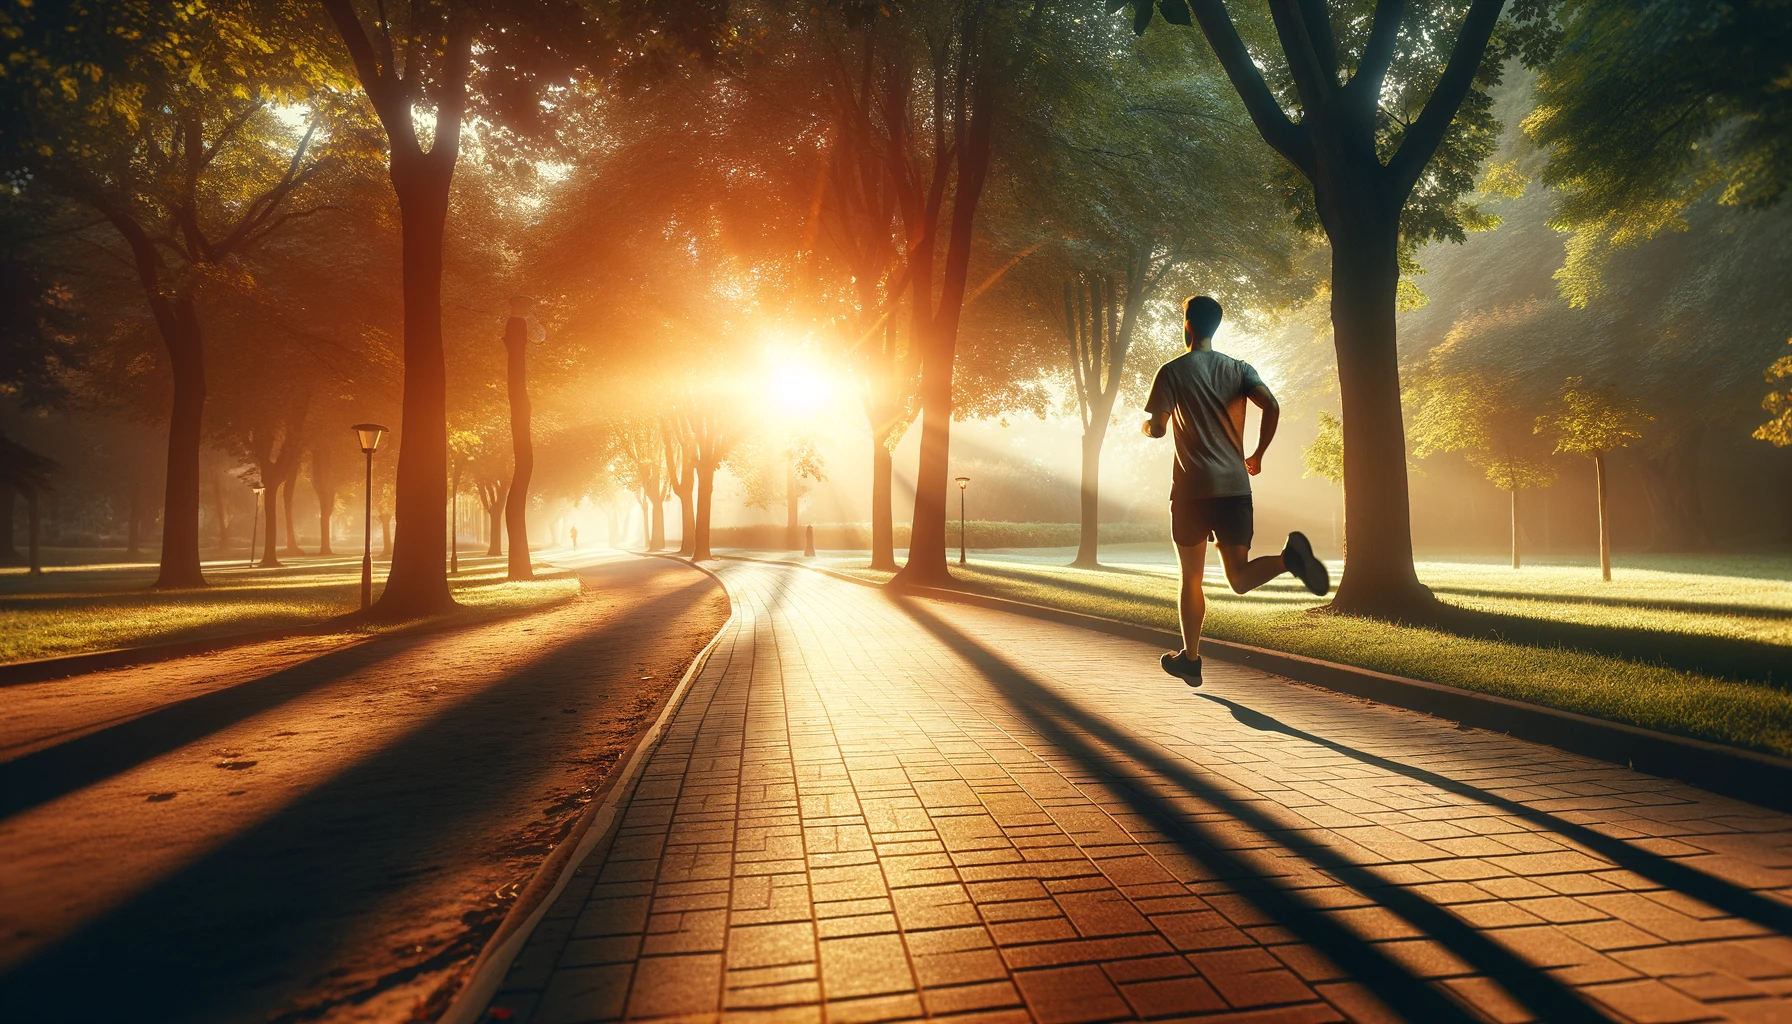 Jogger embracing exercise at sunrise in a park, representing Healthy Life - New Start's commitment to wellness